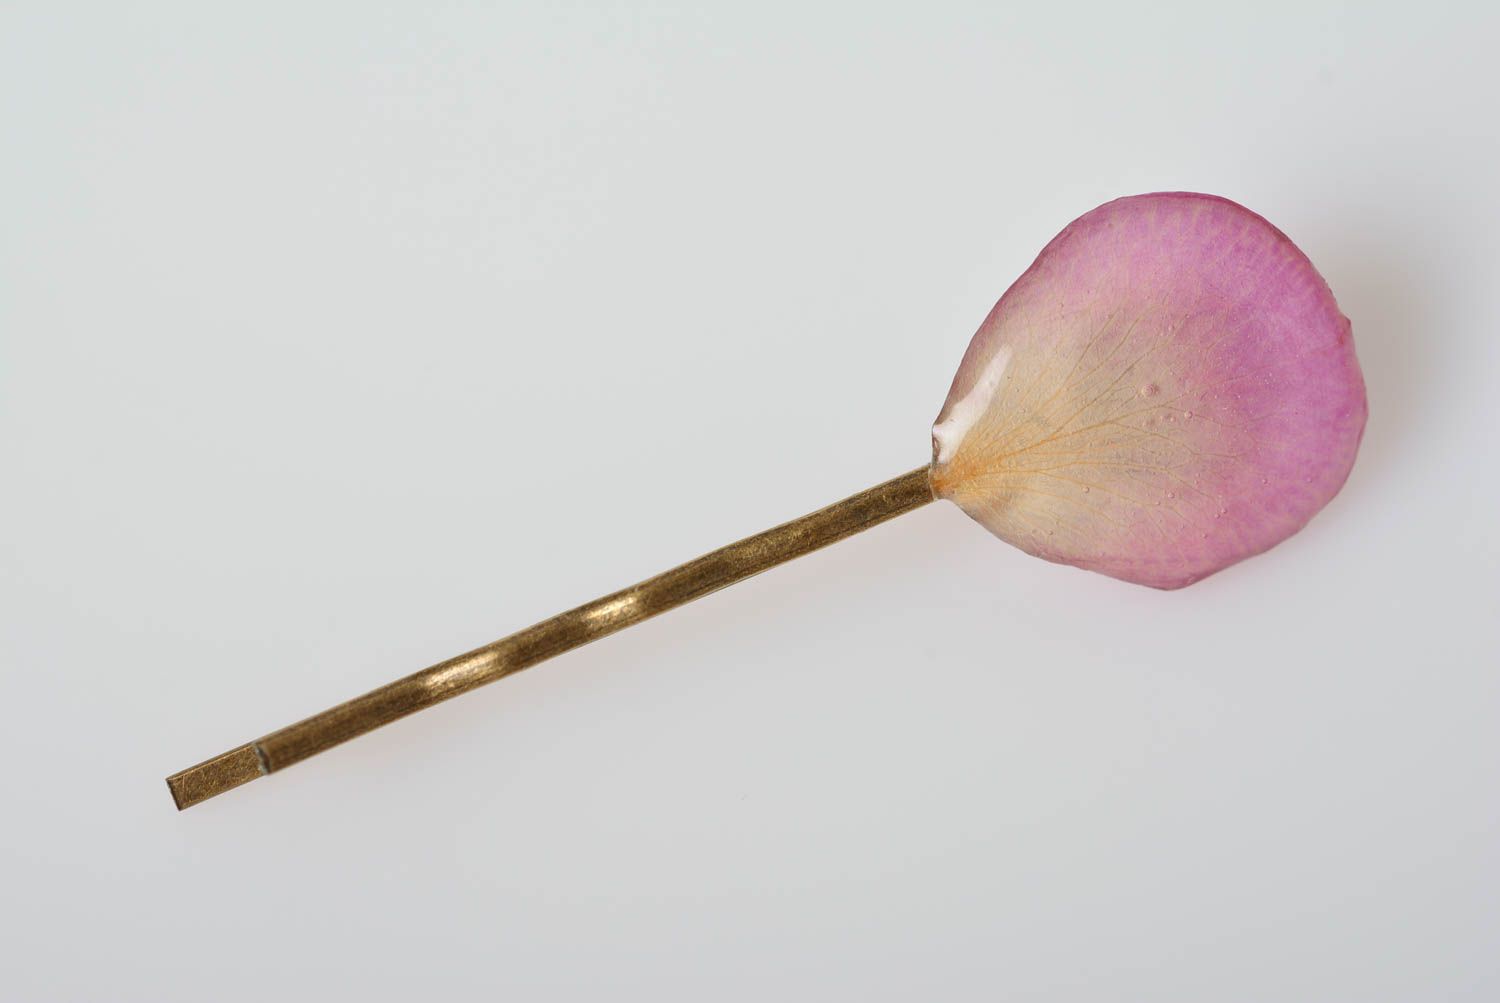 Handmade decorative metal hair pin with dried flower petal in epoxy resin photo 5